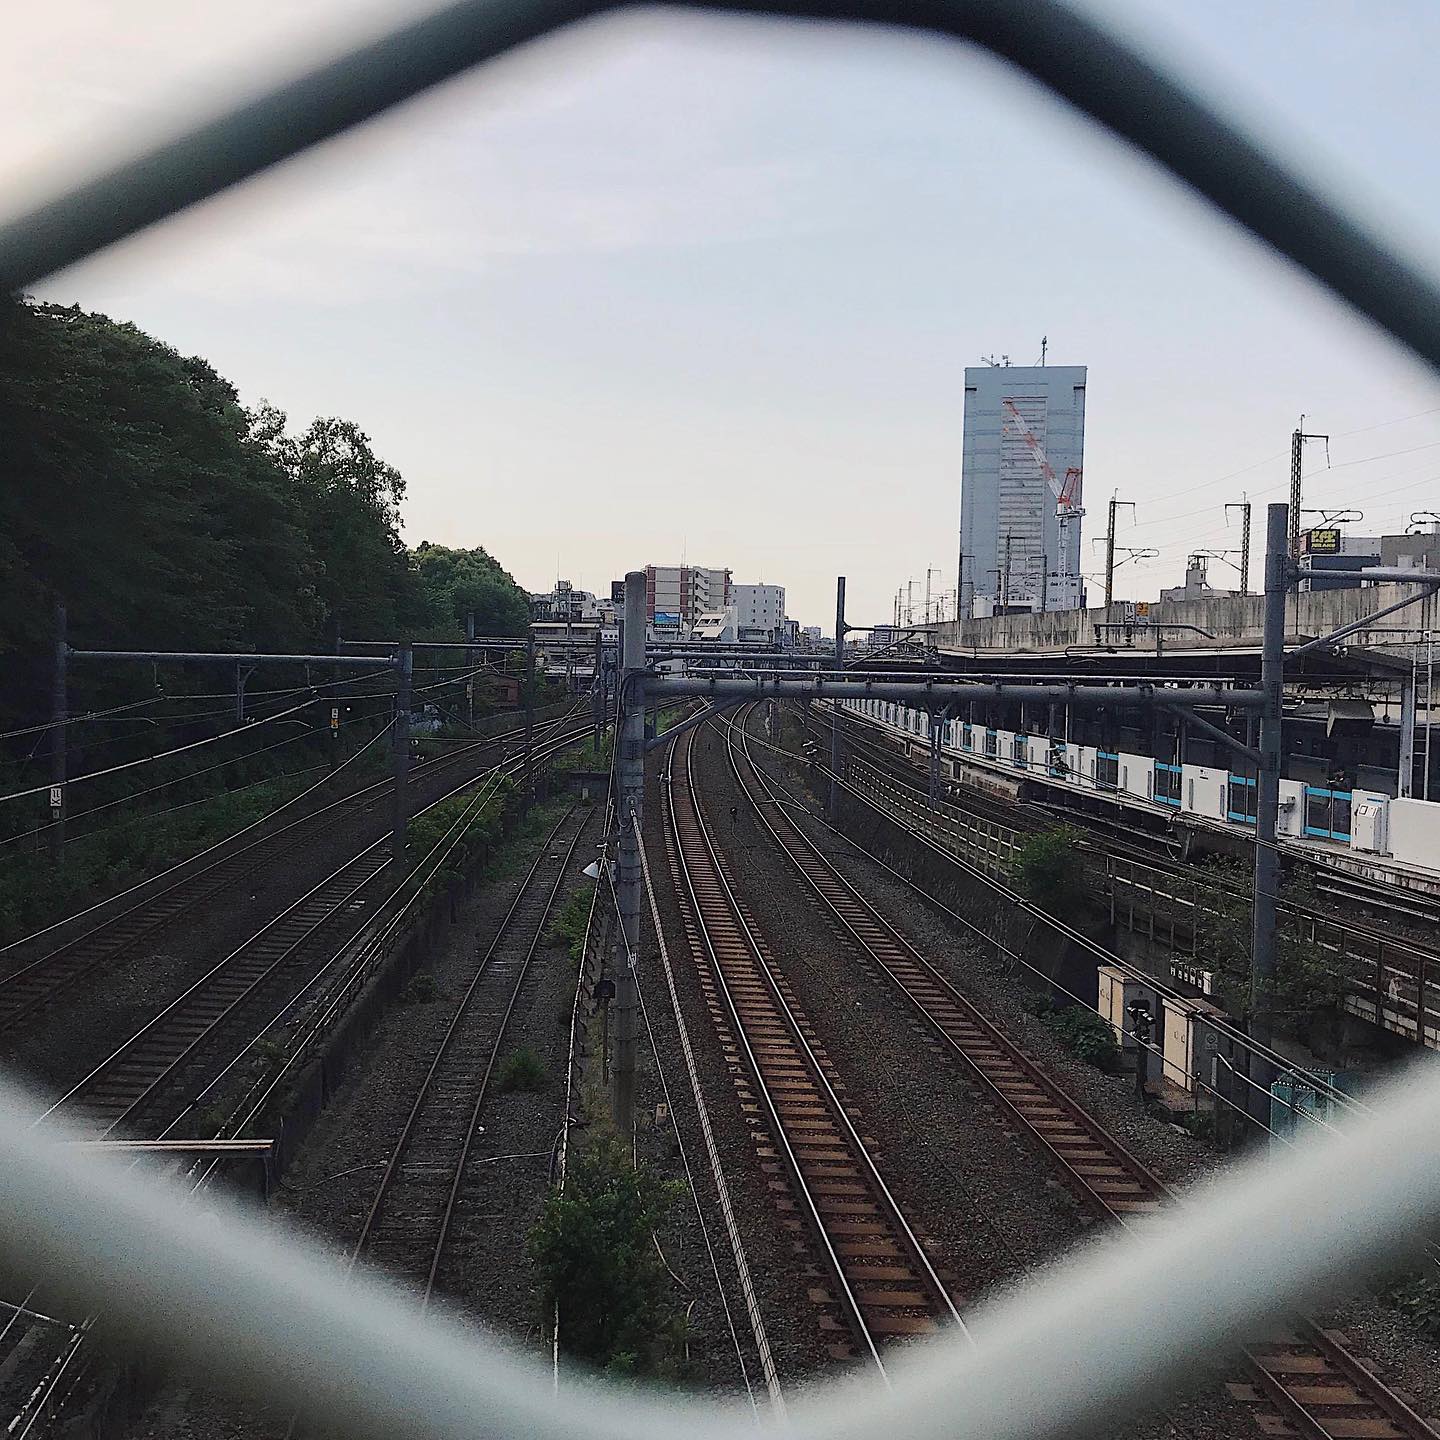 This week's update from AOI Global: Oji Station, Tokyo﻿
You can see both local and bullet trains from here! ﻿
﻿﻿
﻿
﻿
#filmmakersworld﻿﻿
﻿ ﻿
﻿
﻿ #shinkansen﻿
#whenintokyo﻿
﻿